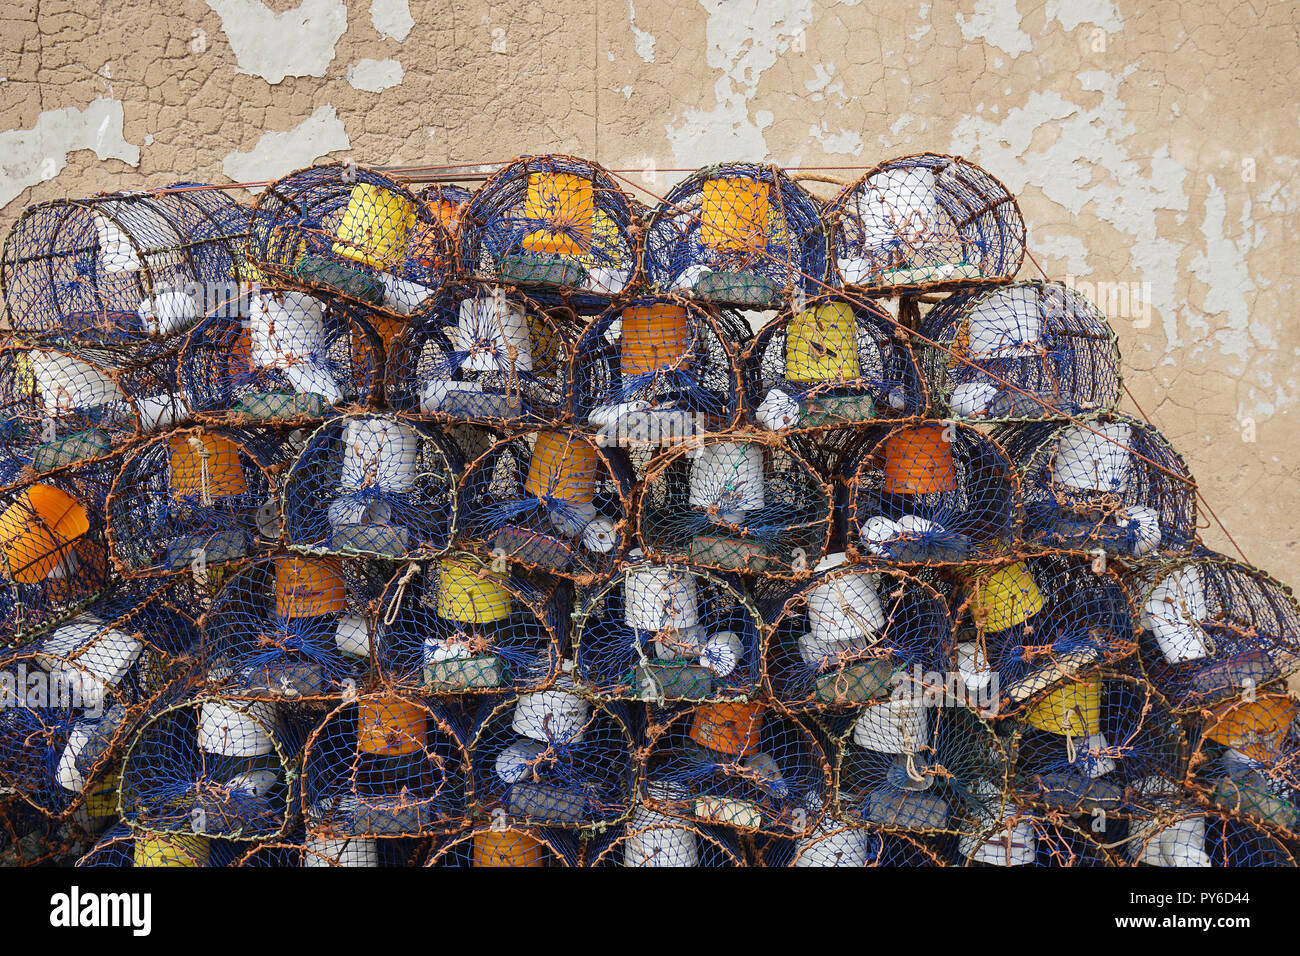 Lobster nets in the fishing port of Essaouira, Morocco. Stock Photo